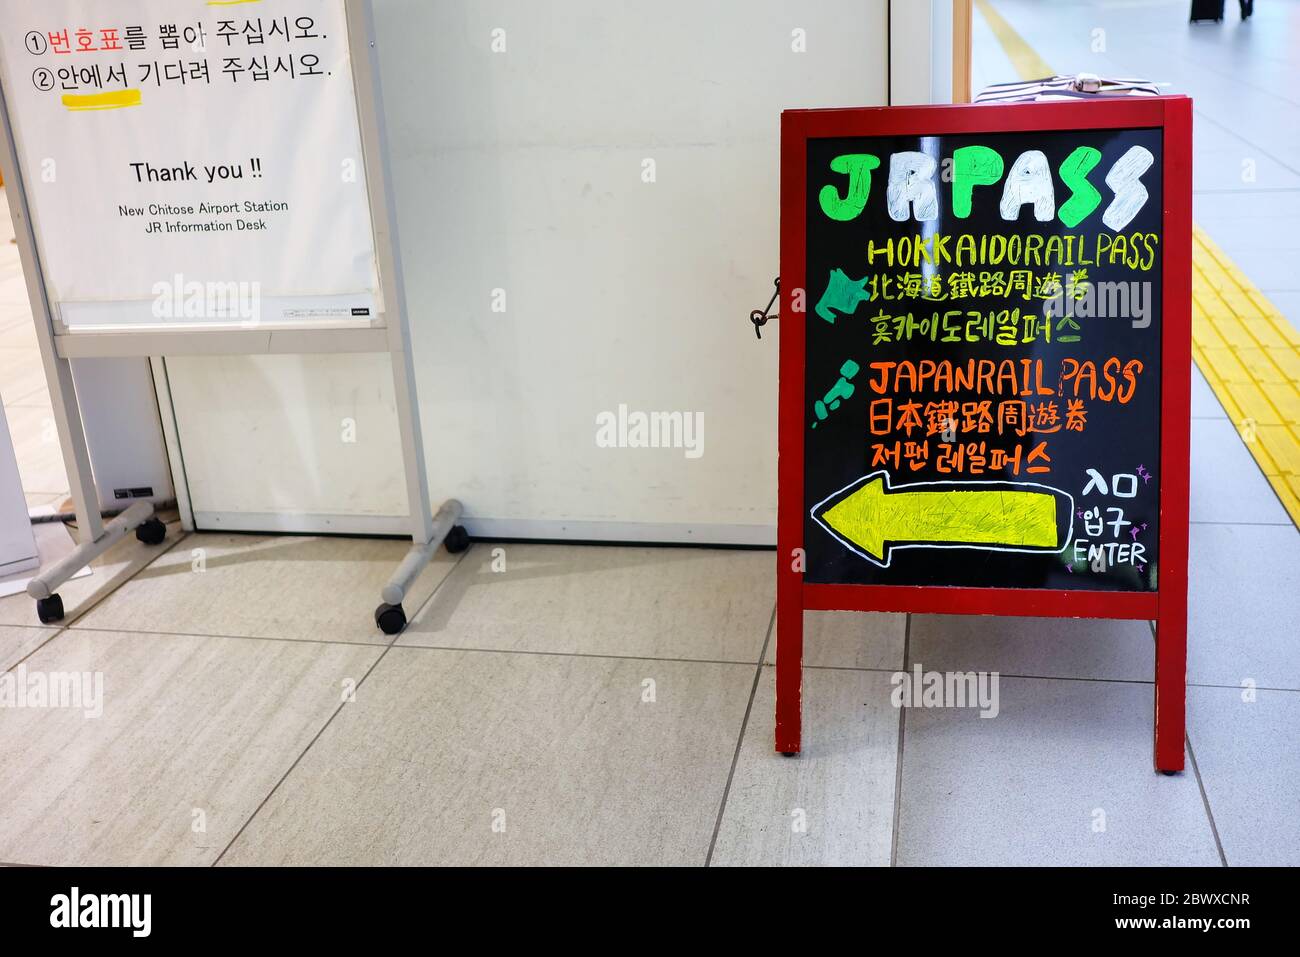 SAPPORO, JAPAN - NOVEMBER 09, 2019: JR Hokkaido Rail pass help desk sign at New Chitose Airport where is the largest airport in Hokkaido, Japan. Stock Photo